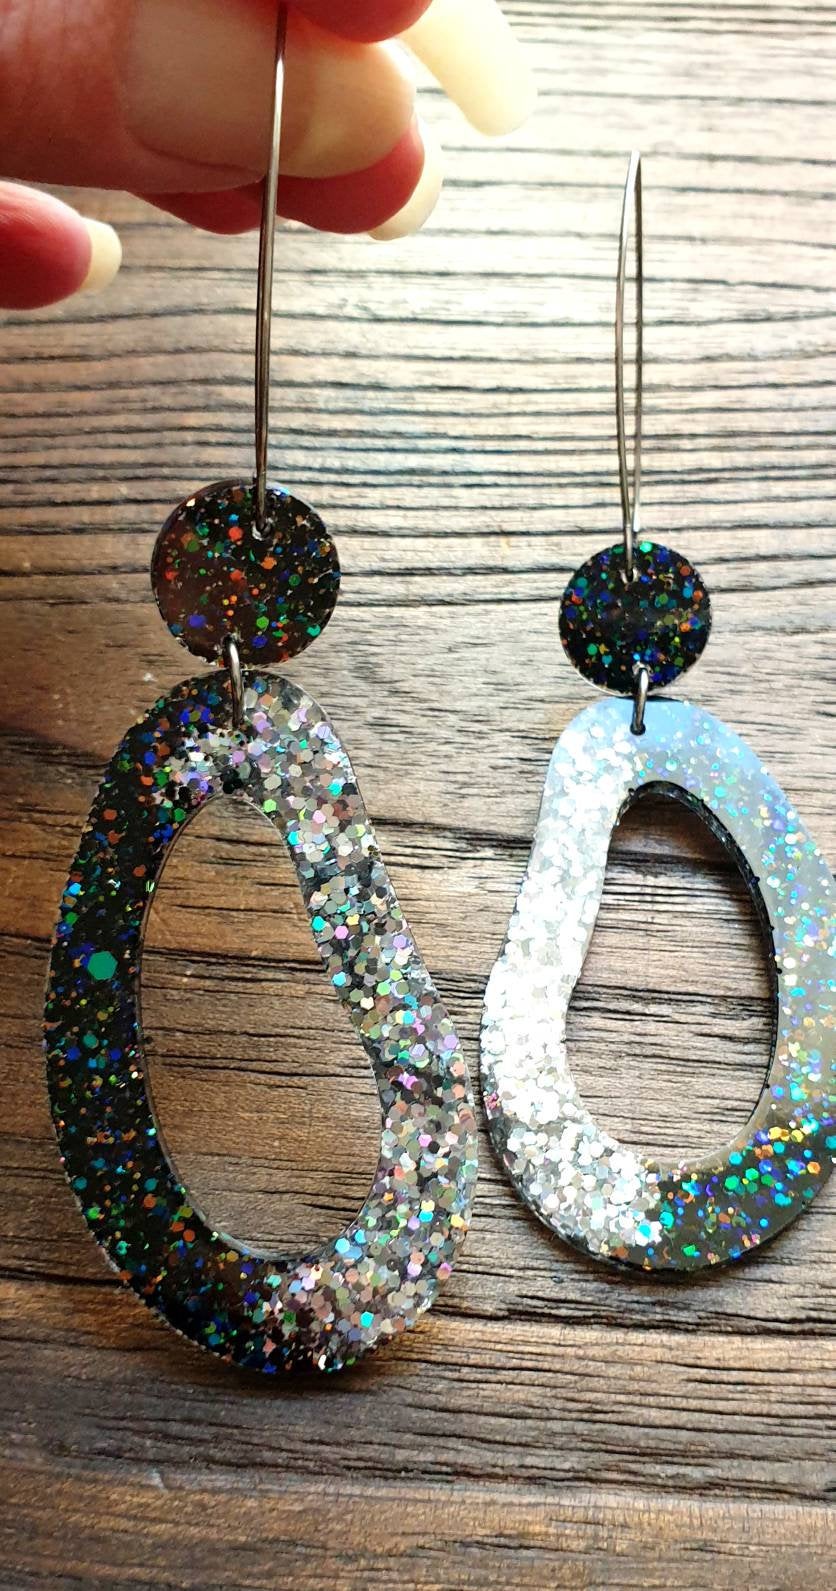 Large Unique Oval Design Long Dangle Earrings, Black Rainbow Silver Holographic Glitter Resin Dangle Statement Earrings